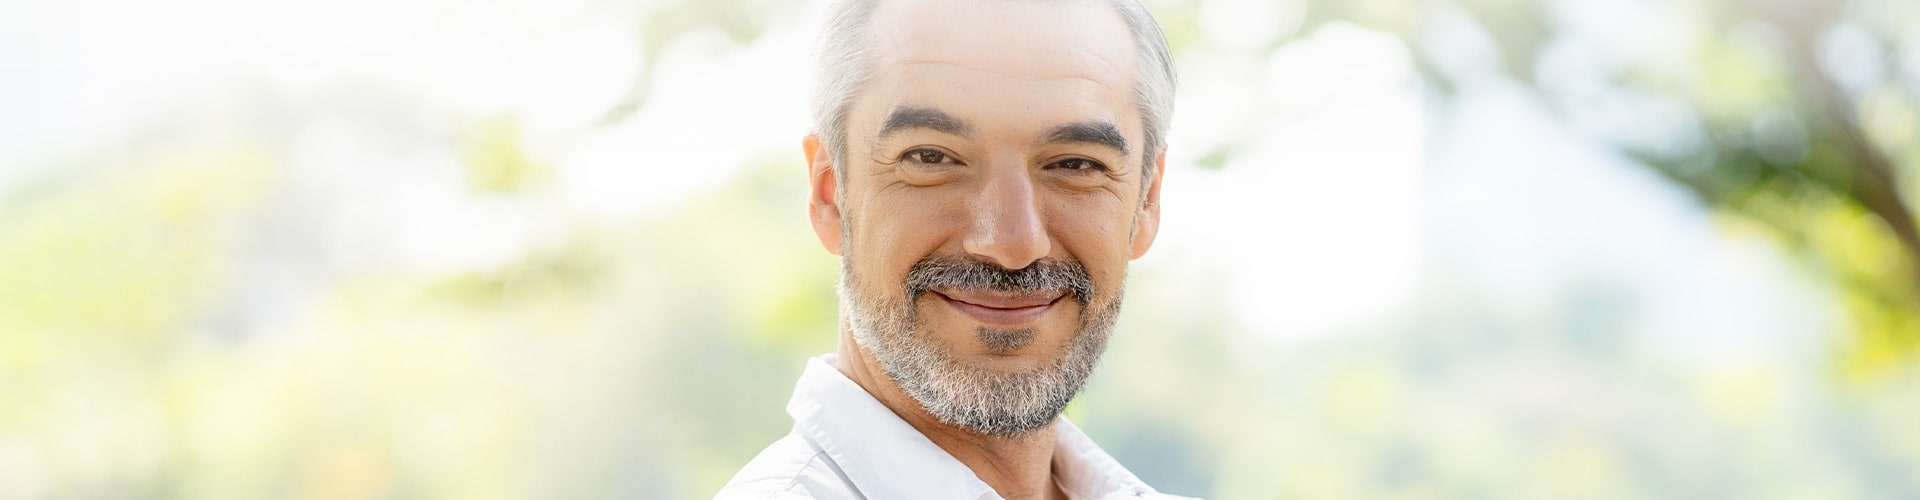 middle aged man smiling